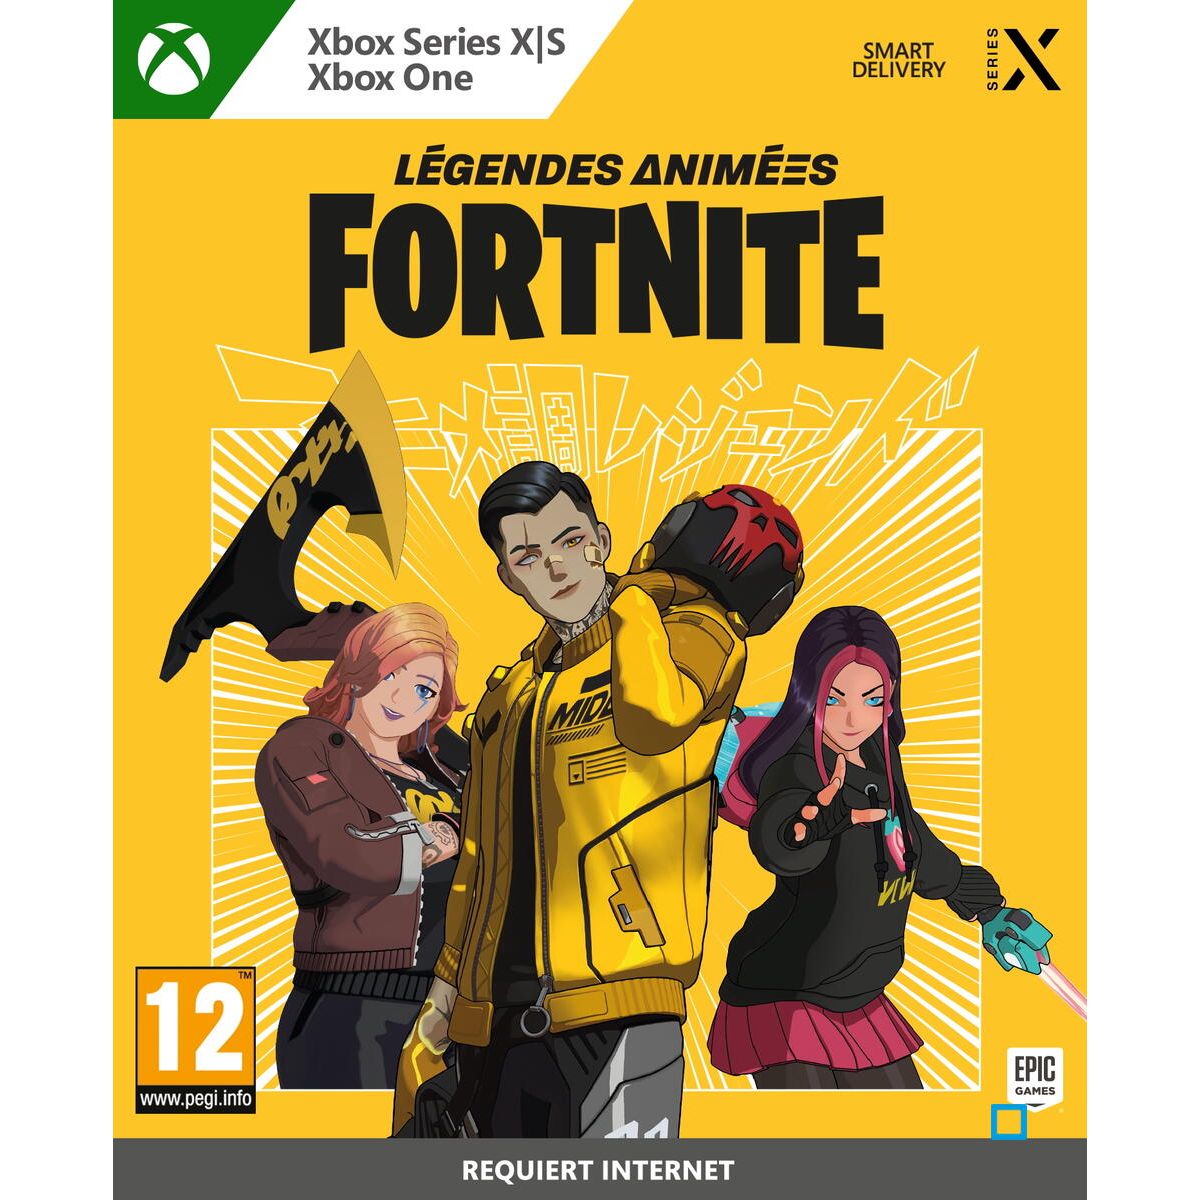 Fortnite - anime legends pack xbox series x Epic Games